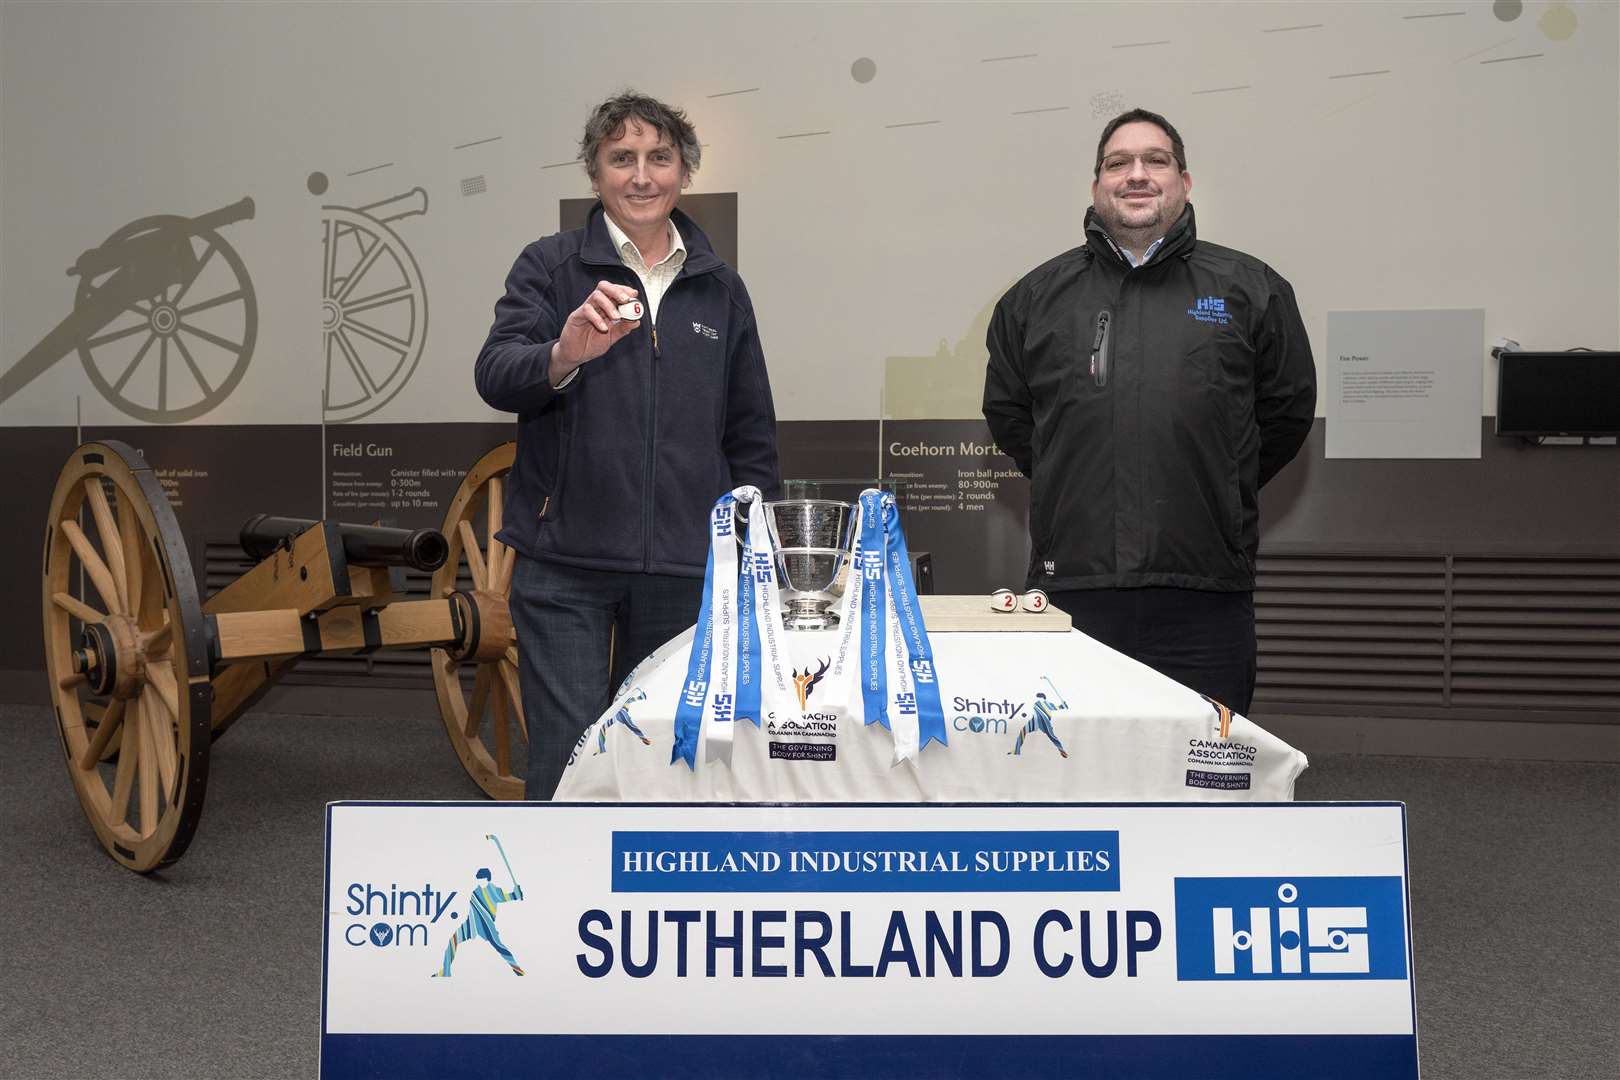 The draw was made at Culloden Battlefield by Highland Industrial Supplies Garry Mackintosh and operations manager at Culloden Raoul Curtis-Machin.